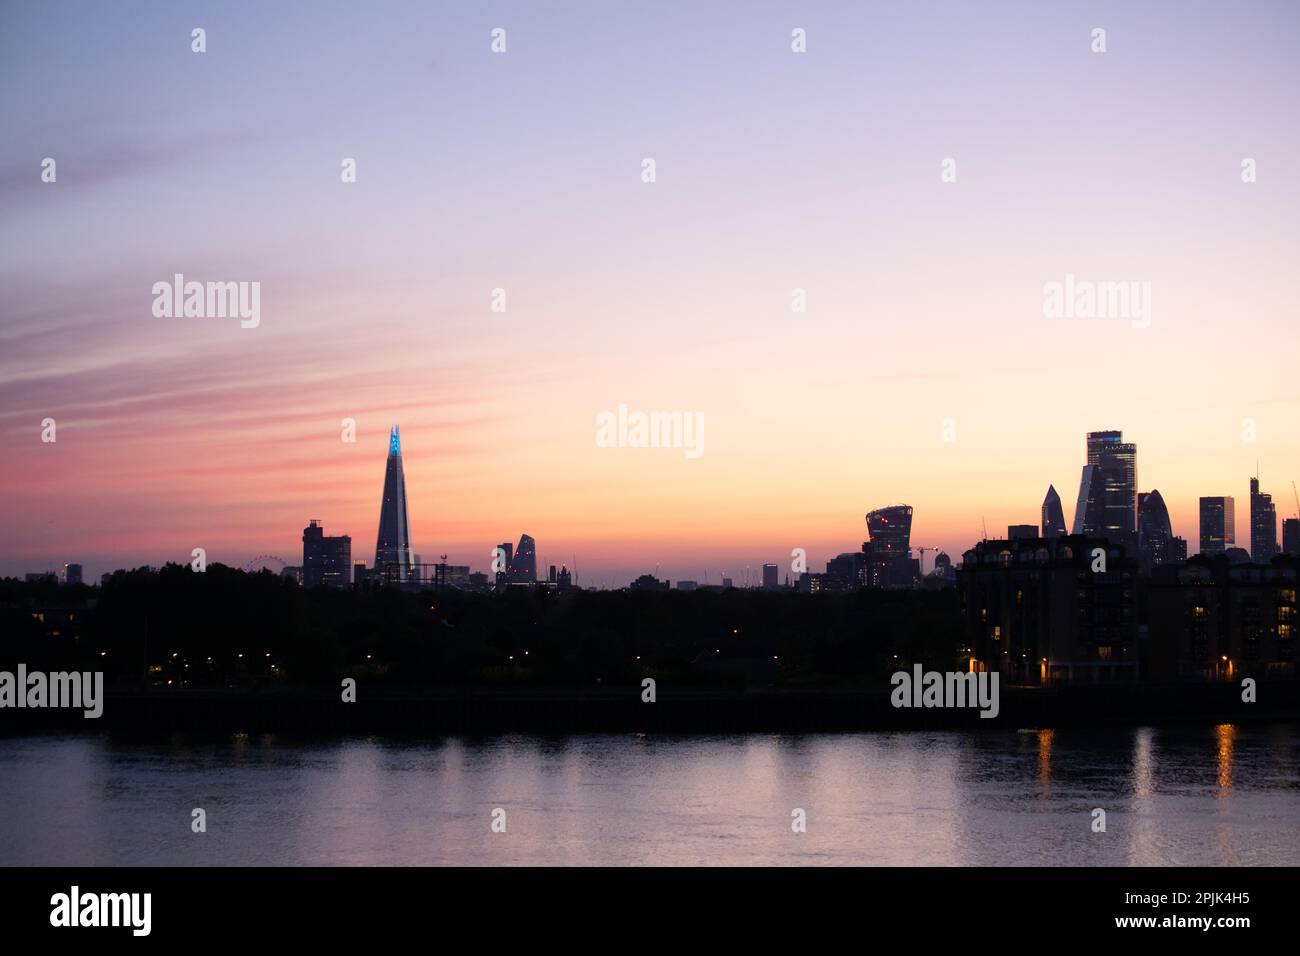 Pink, purple and orange striped radiatus altostratus clouds cover the sky over the London skyline at sunset. Stock Photo